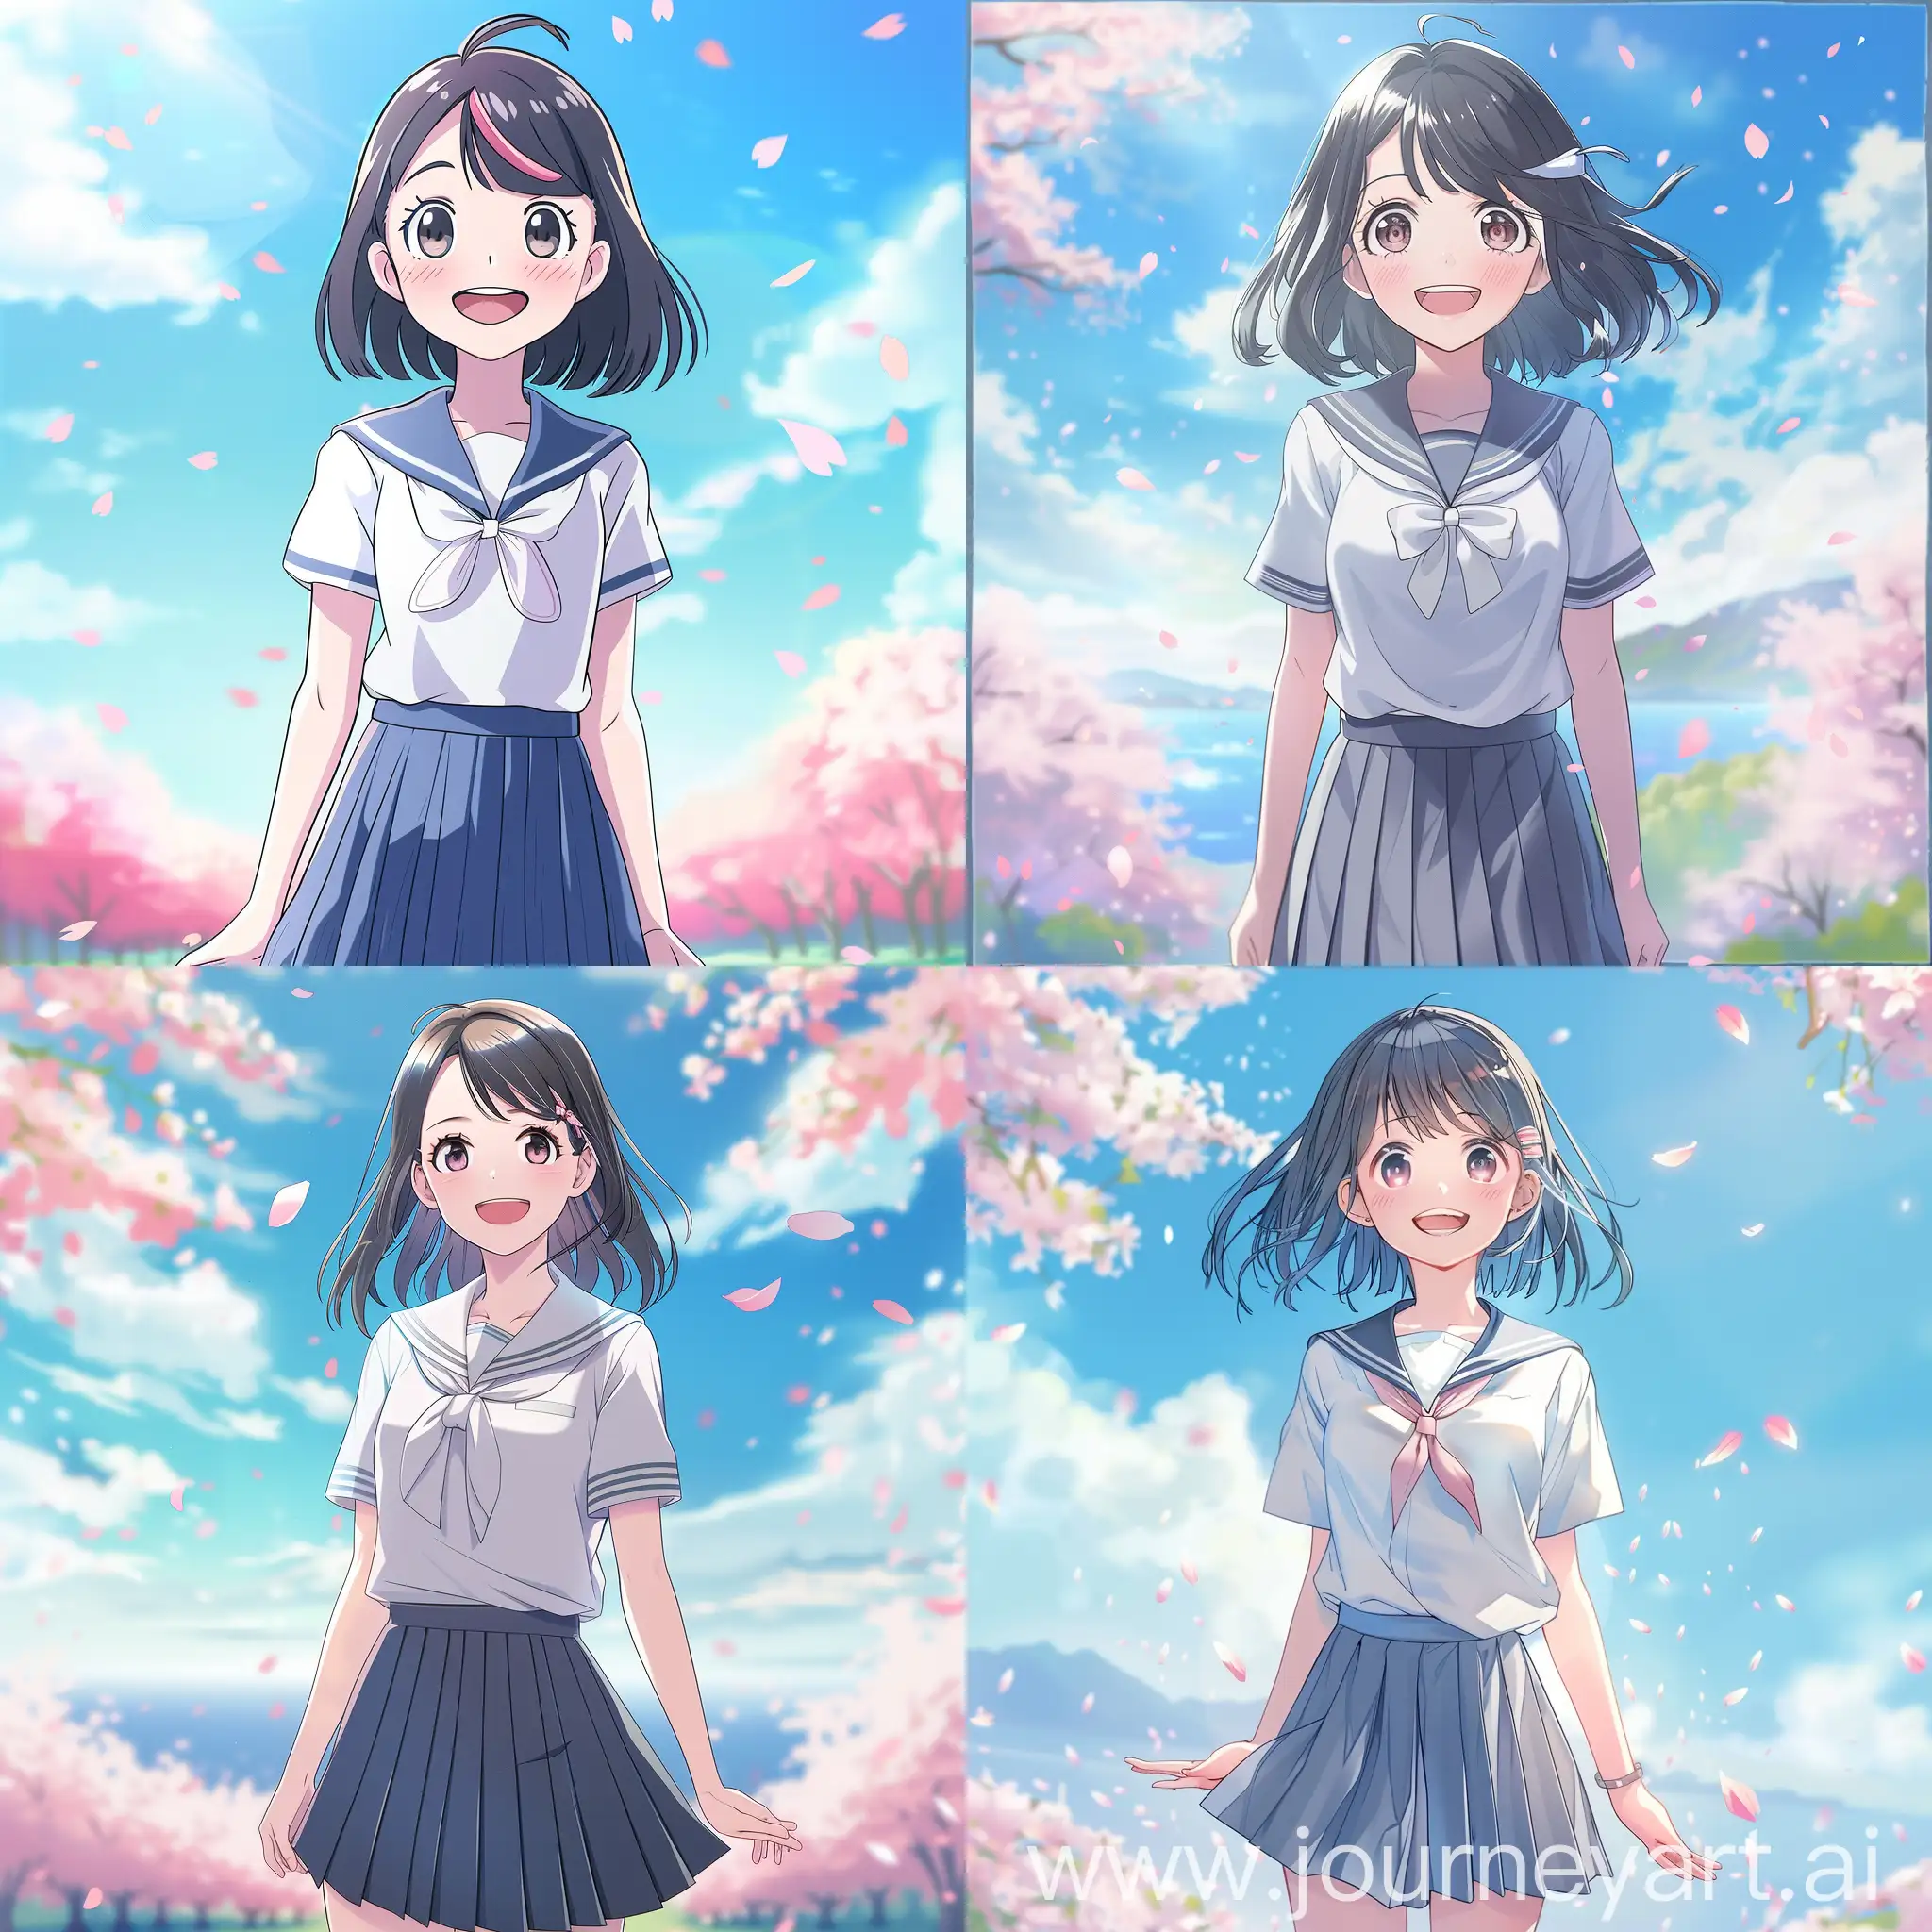 Cute anime girl, shoulder length hair, happy smile, full body, 2D anime style, colorful, vibrant, simple clean lineart, flat colors, minimalistic shading, pastel color palette, standing pose, school uniform, pleated skirt, sailor collar, hair ribbon, cheerful expression, large expressive eyes, blushing cheeks, detailed background, cherry blossom petals floating in air, blue sky, soft fluffy clouds, picturesque scenery, spring vibes, Kyoto Animation, P.A.Works, ufotable, Makoto Shinkai, Hayao Miyazaki, Studio Ghibli, trending on pixiv